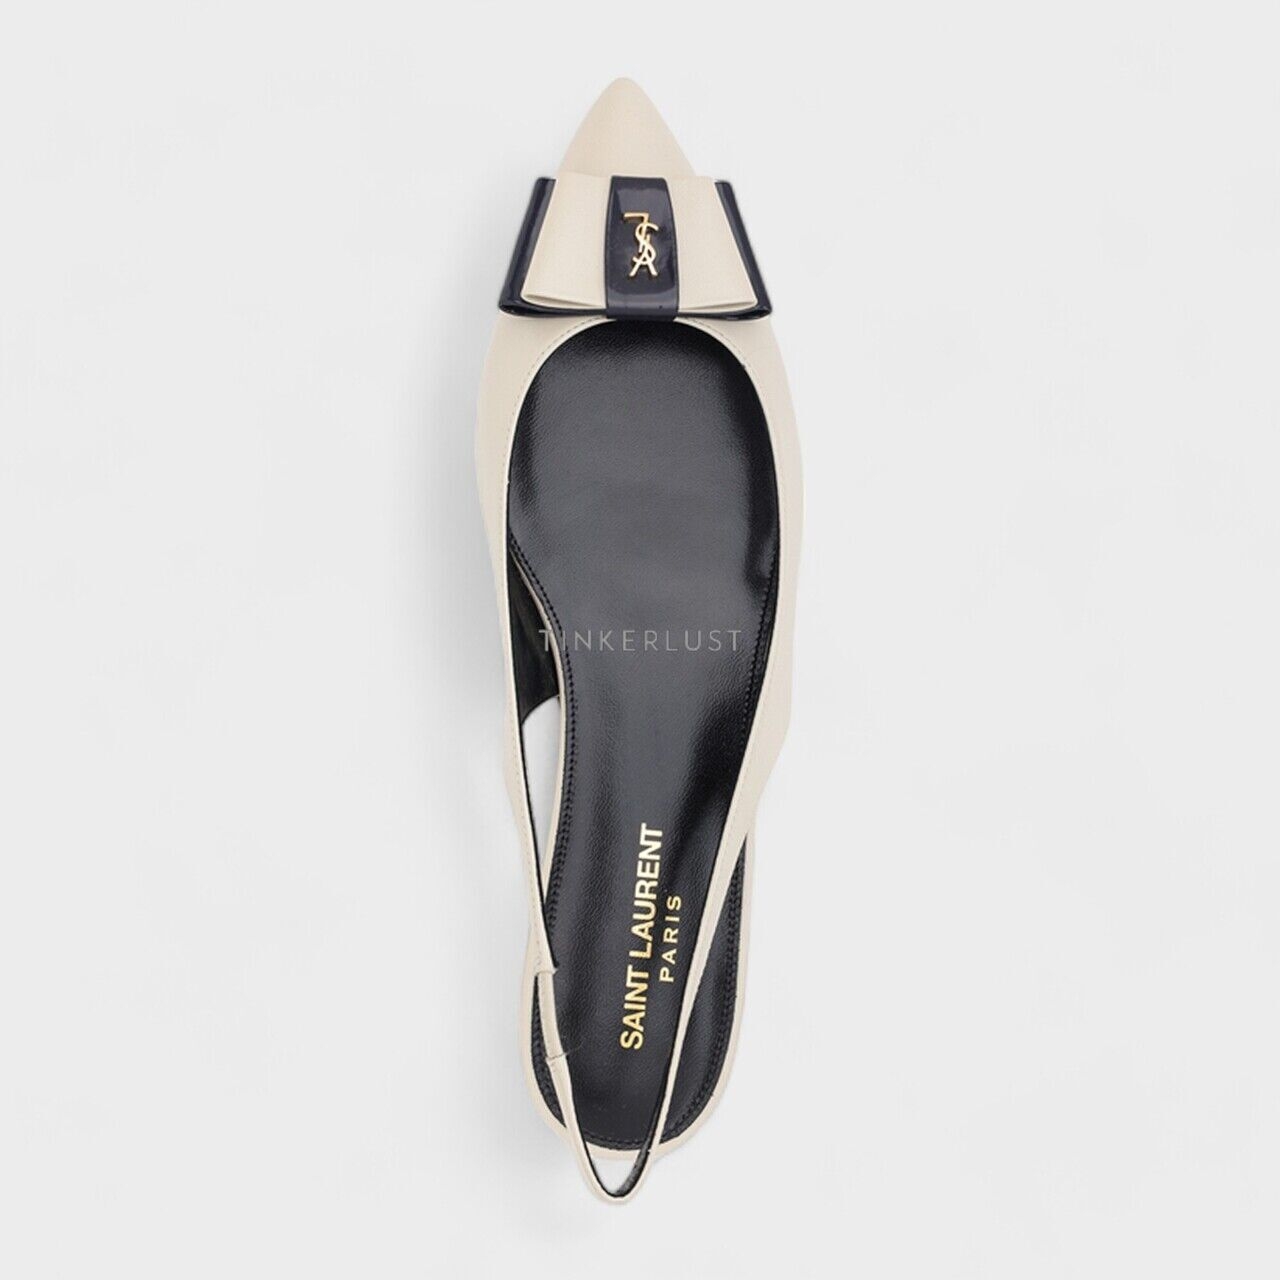 Saint Laurent Anais Pearl/Navy Smooth & Patent Leather Slingback Flats